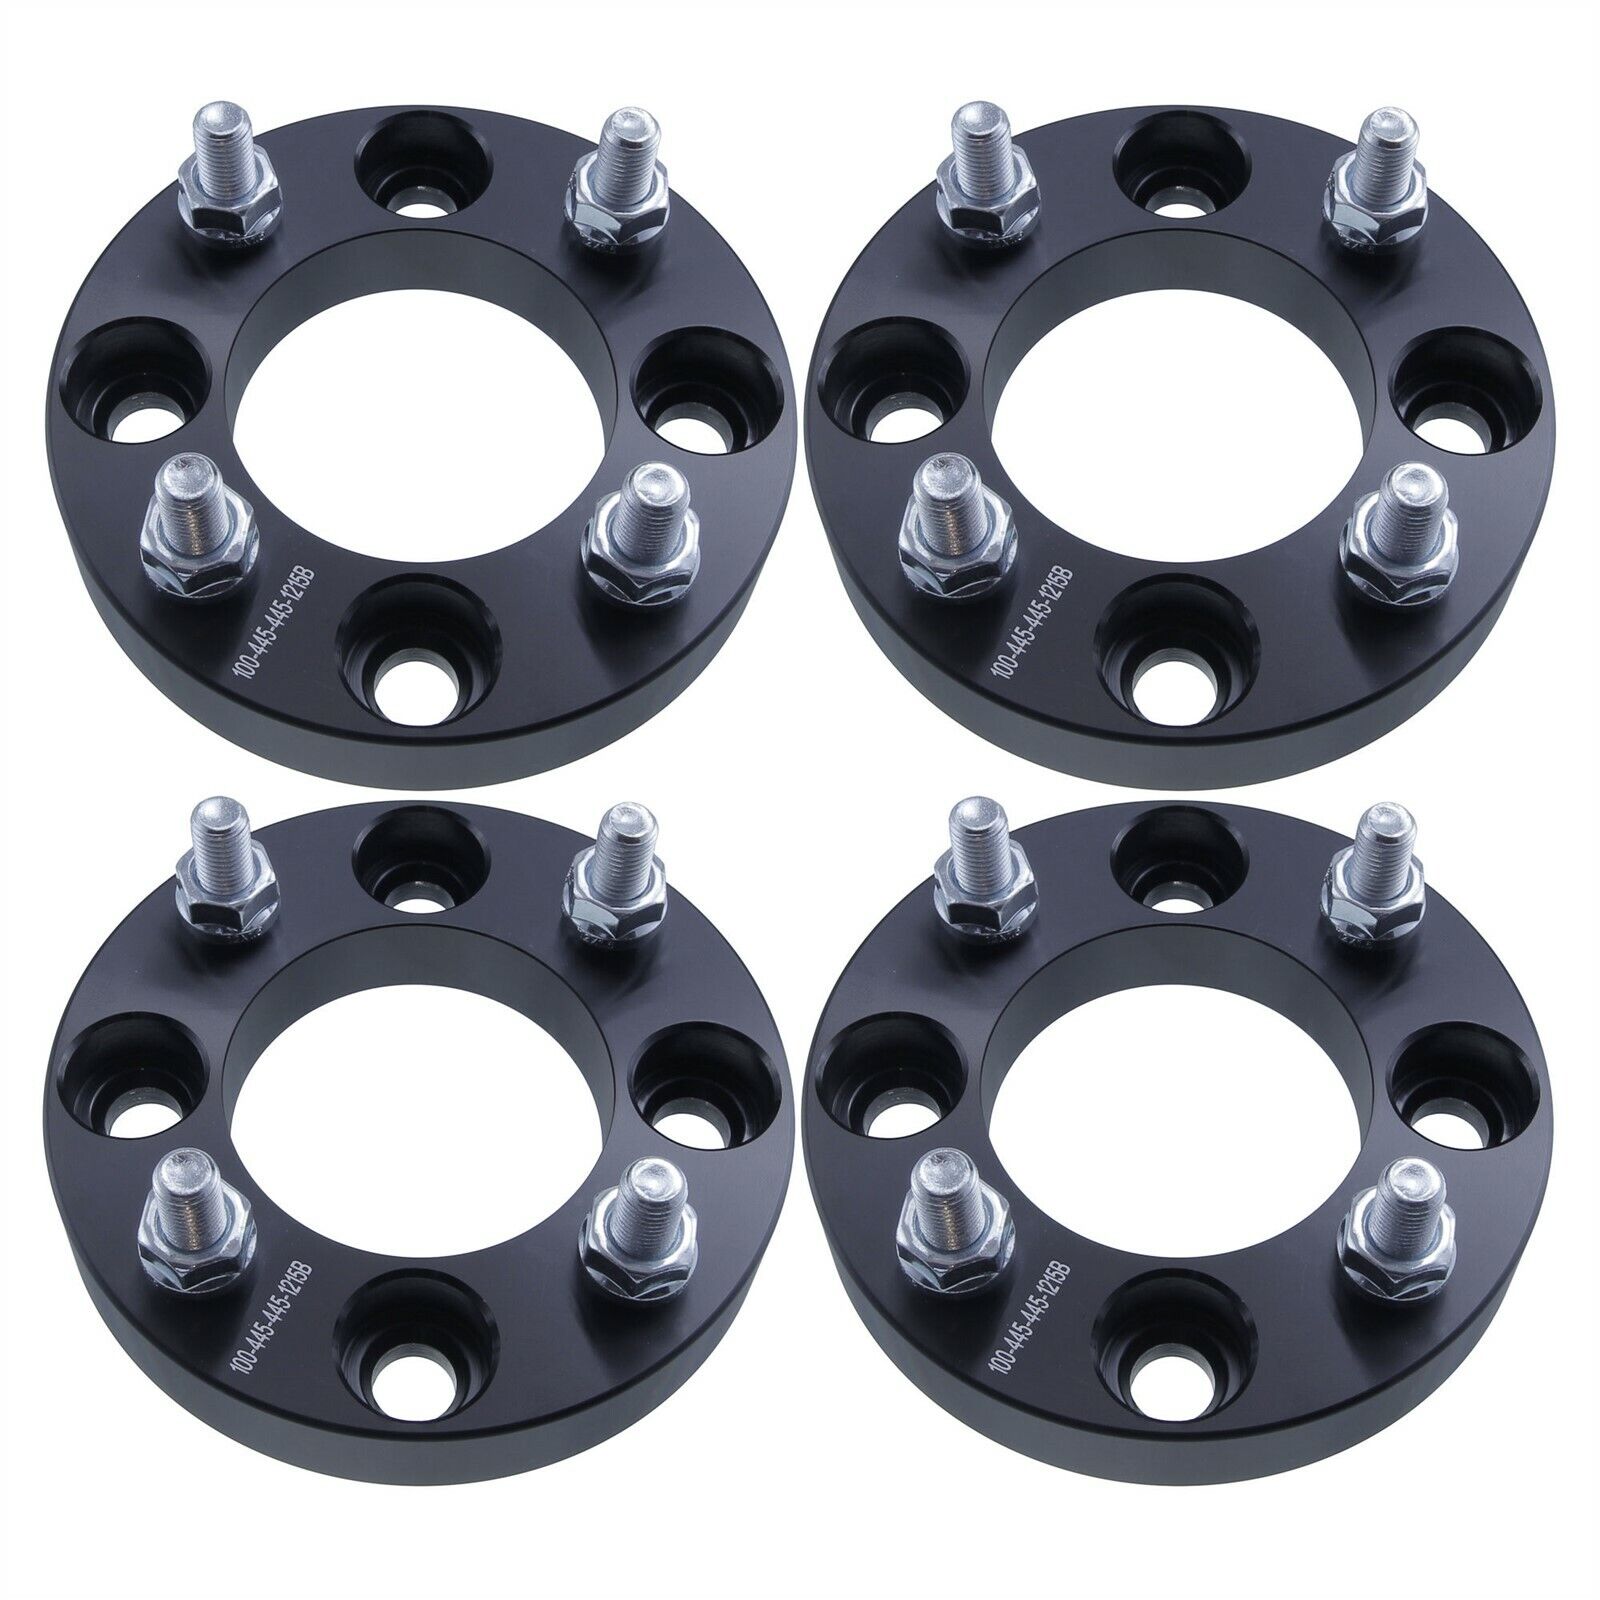 (4) 25mm 4 lug Wheel Spacers Fits Honda Accord Prelude Acura TL Legend CL